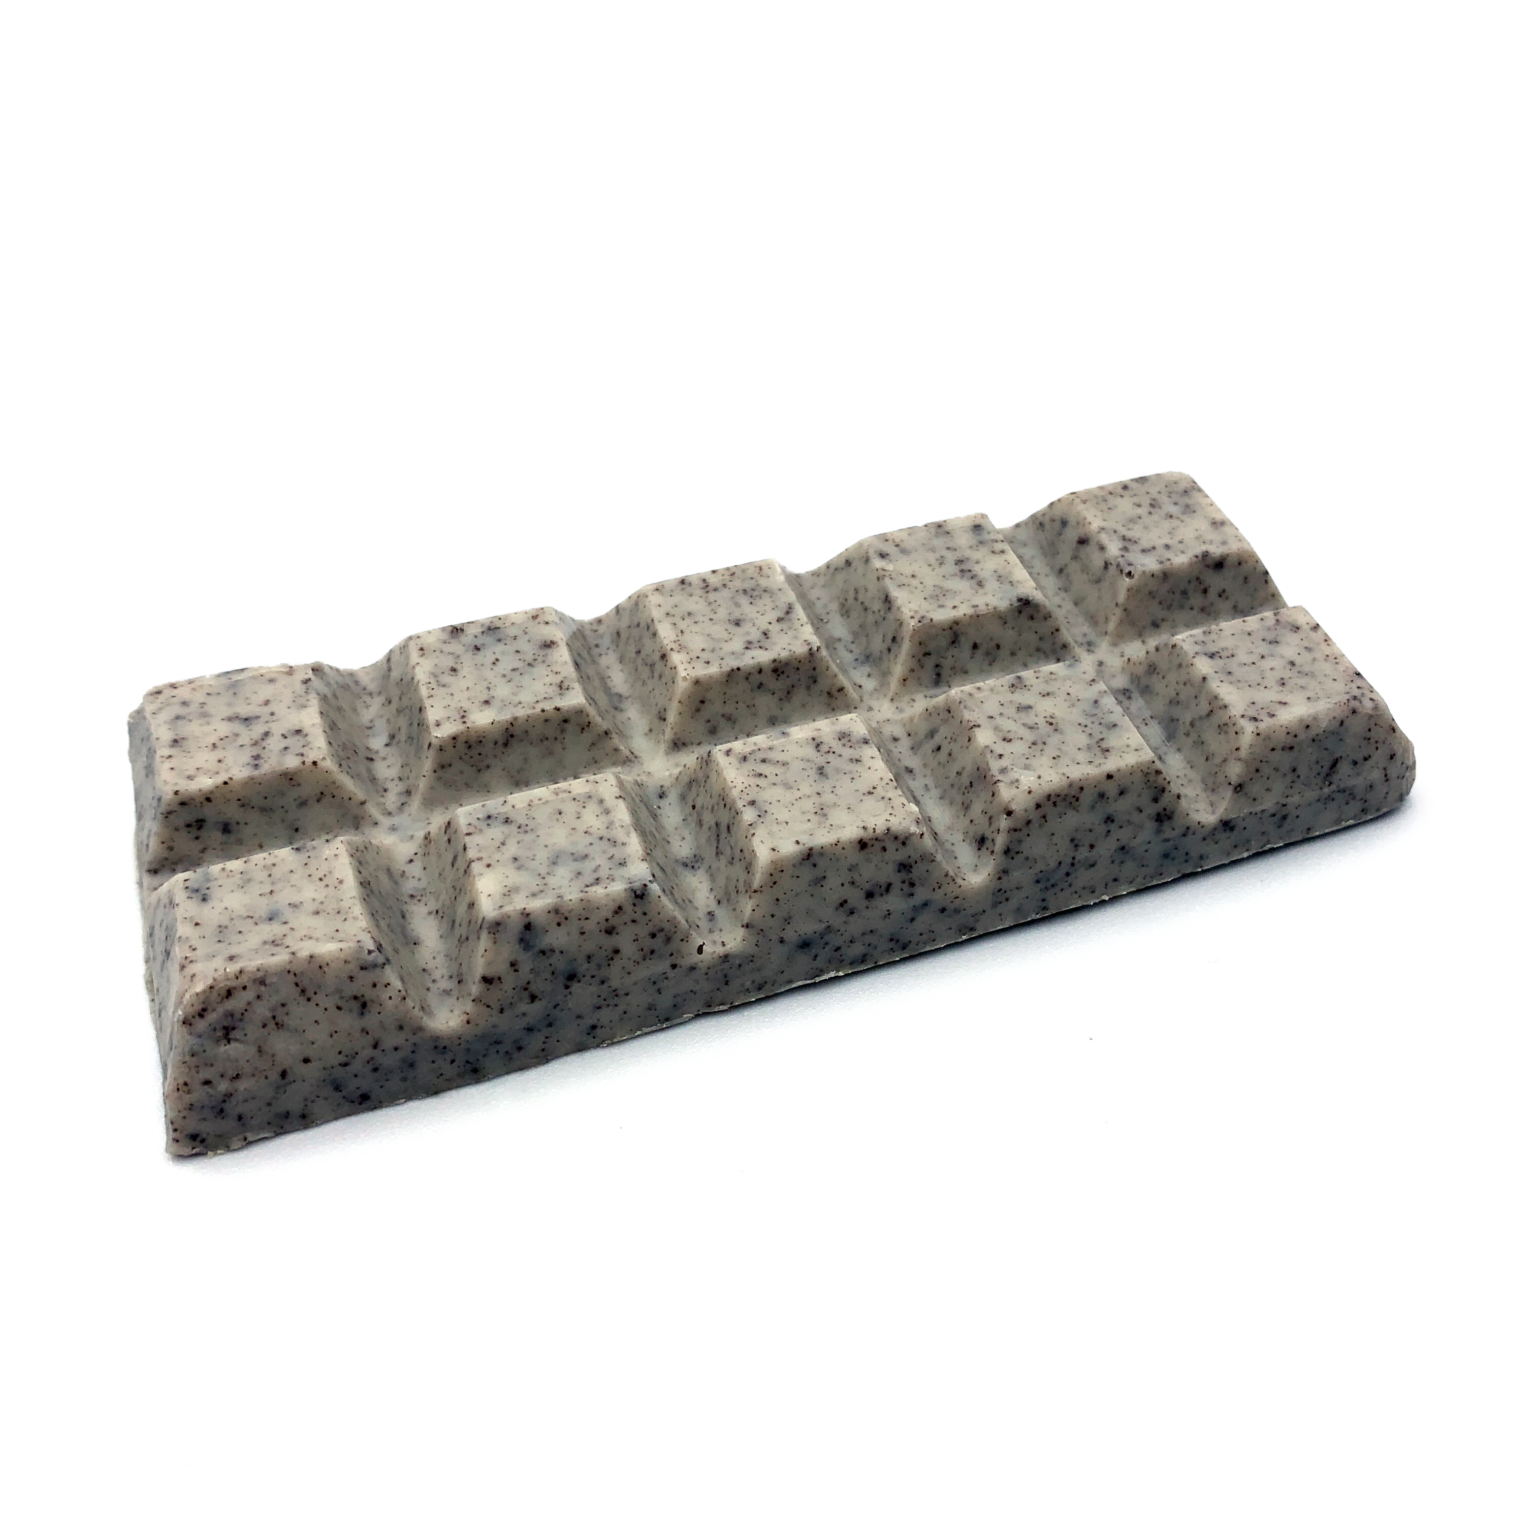 Ripped Edibles Chocolate – Cookies & Cream (400mg THC)